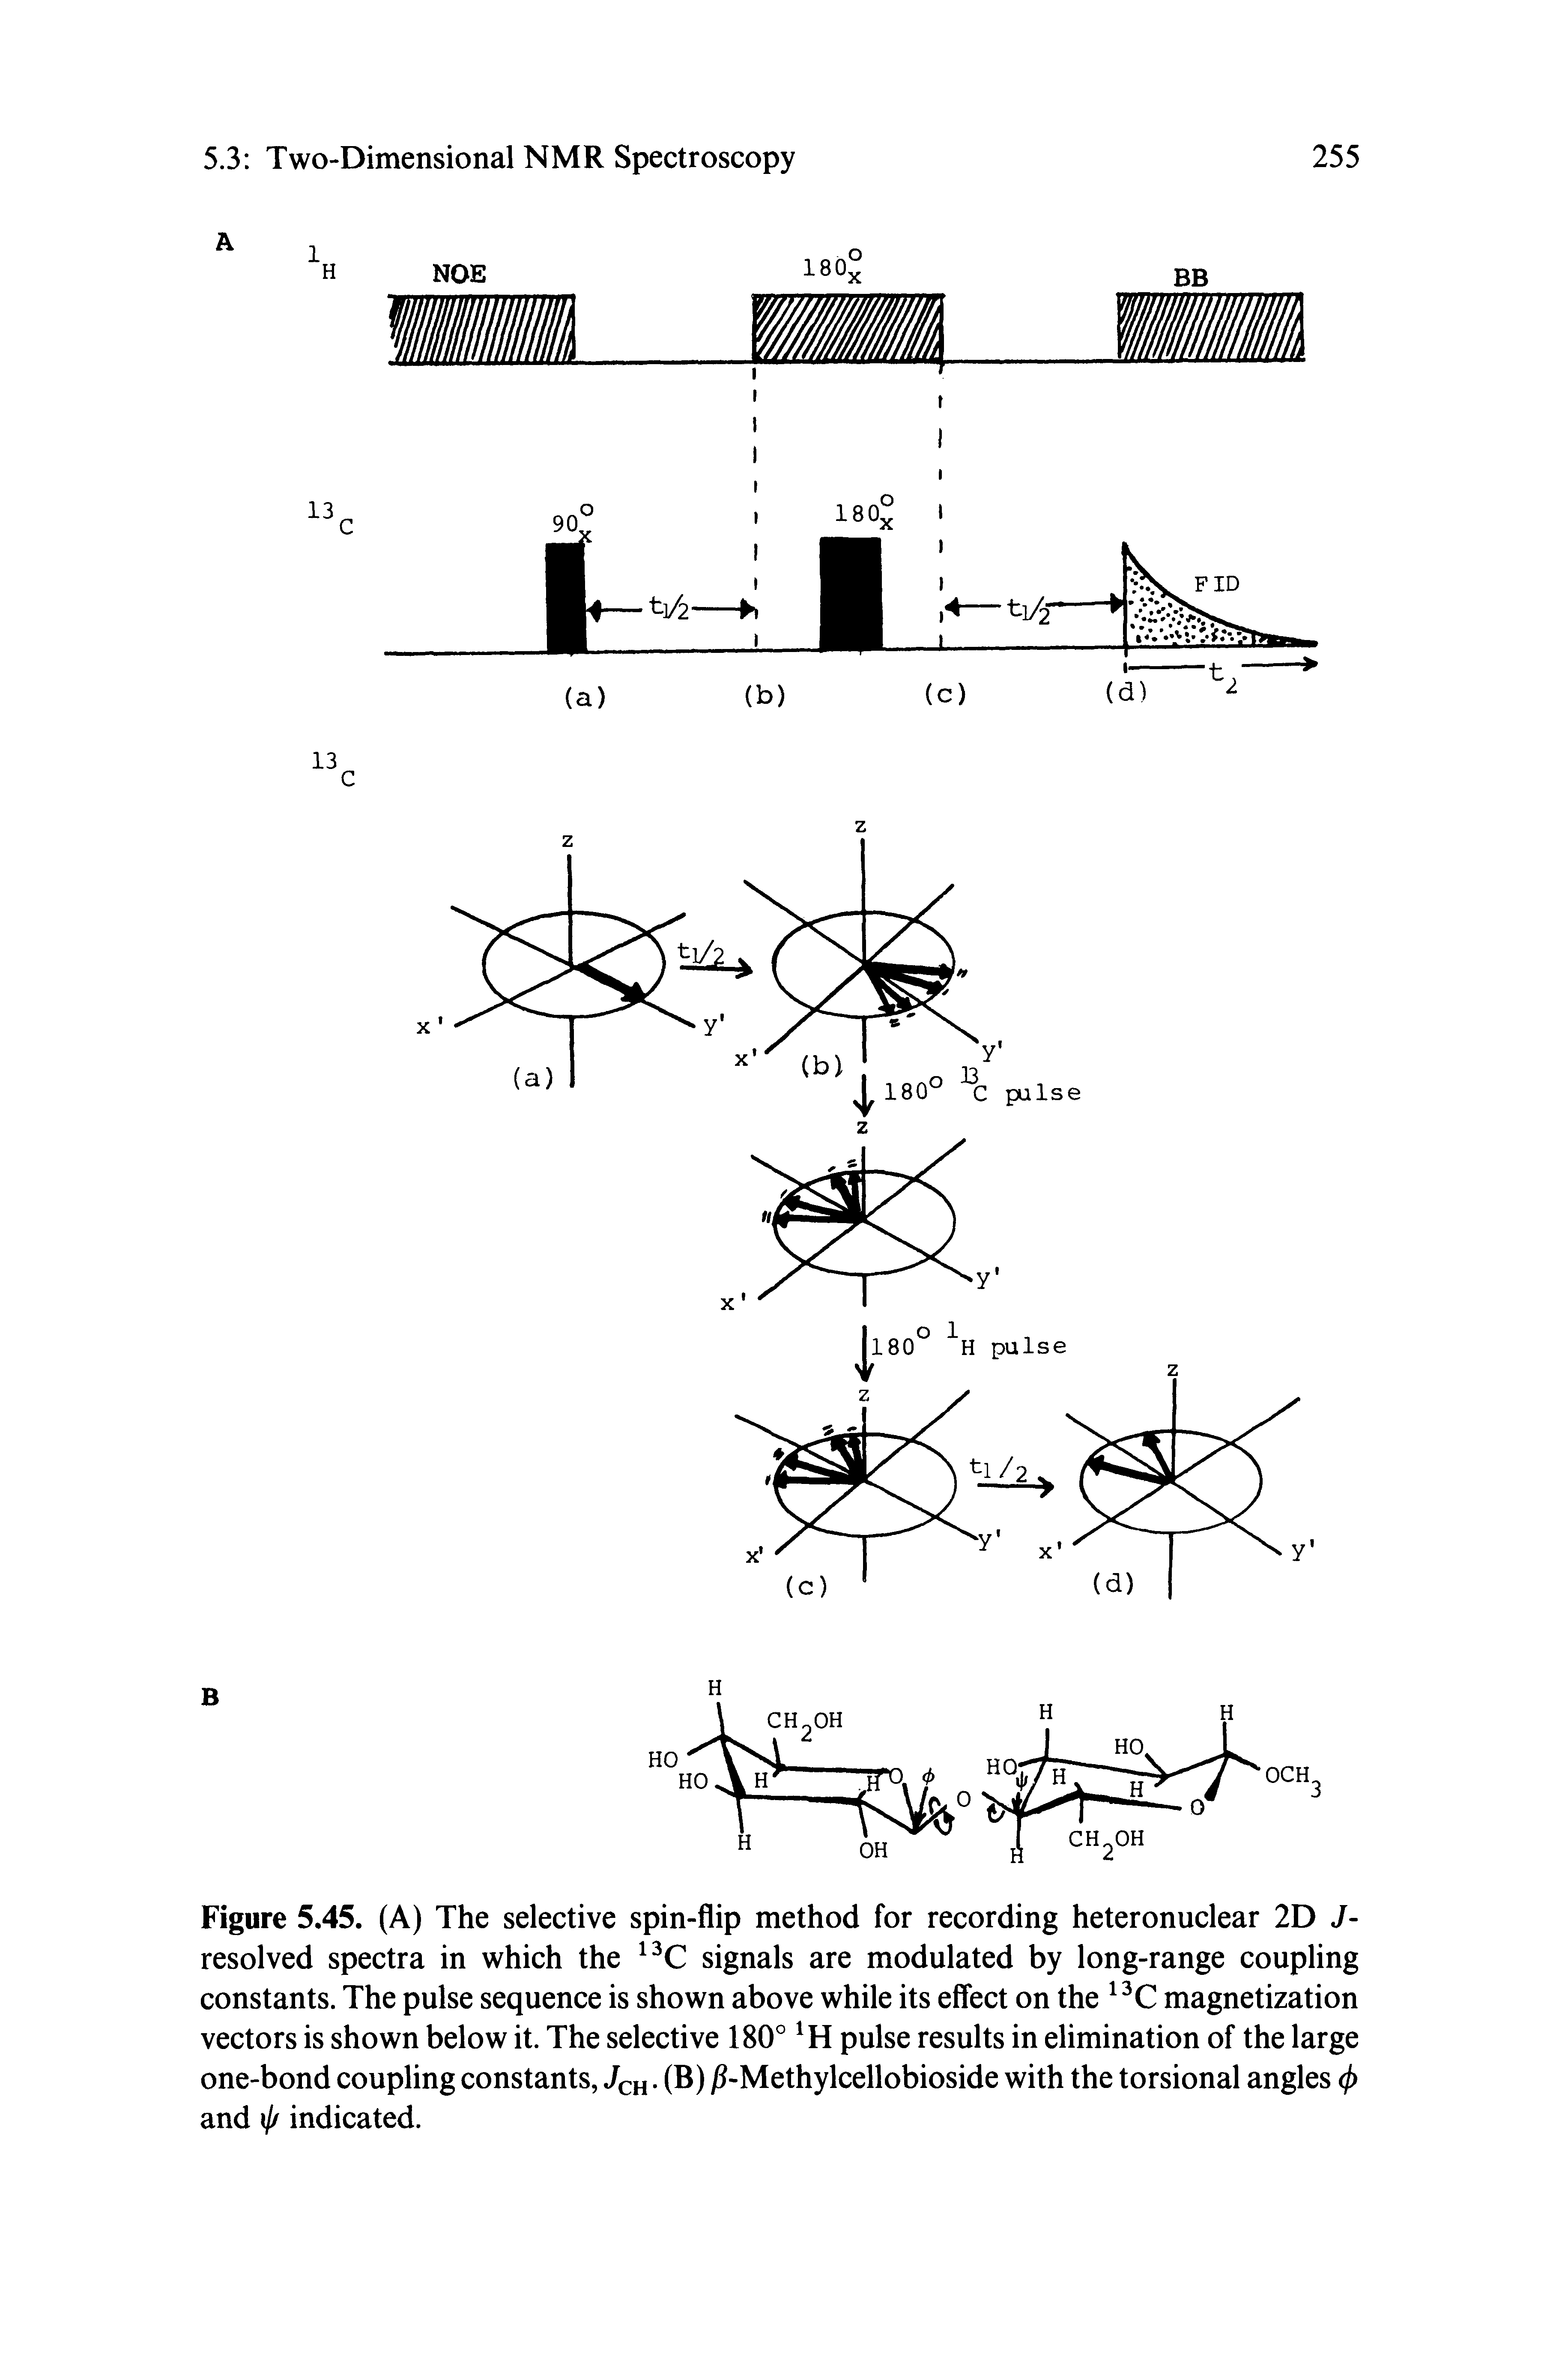 Figure 5.45. (A) The selective spin-flip method for recording heteronuclear 2D J-resolved spectra in which the signals are modulated by long-range coupling constants. The pulse sequence is shown above while its effect on the magnetization vectors is shown below it. The selective 180° pulse results in elimination of the large one-bond coupling constants, Jch ( ) j -Methylcellobioside with the torsional angles (j) and ij/ indicated.